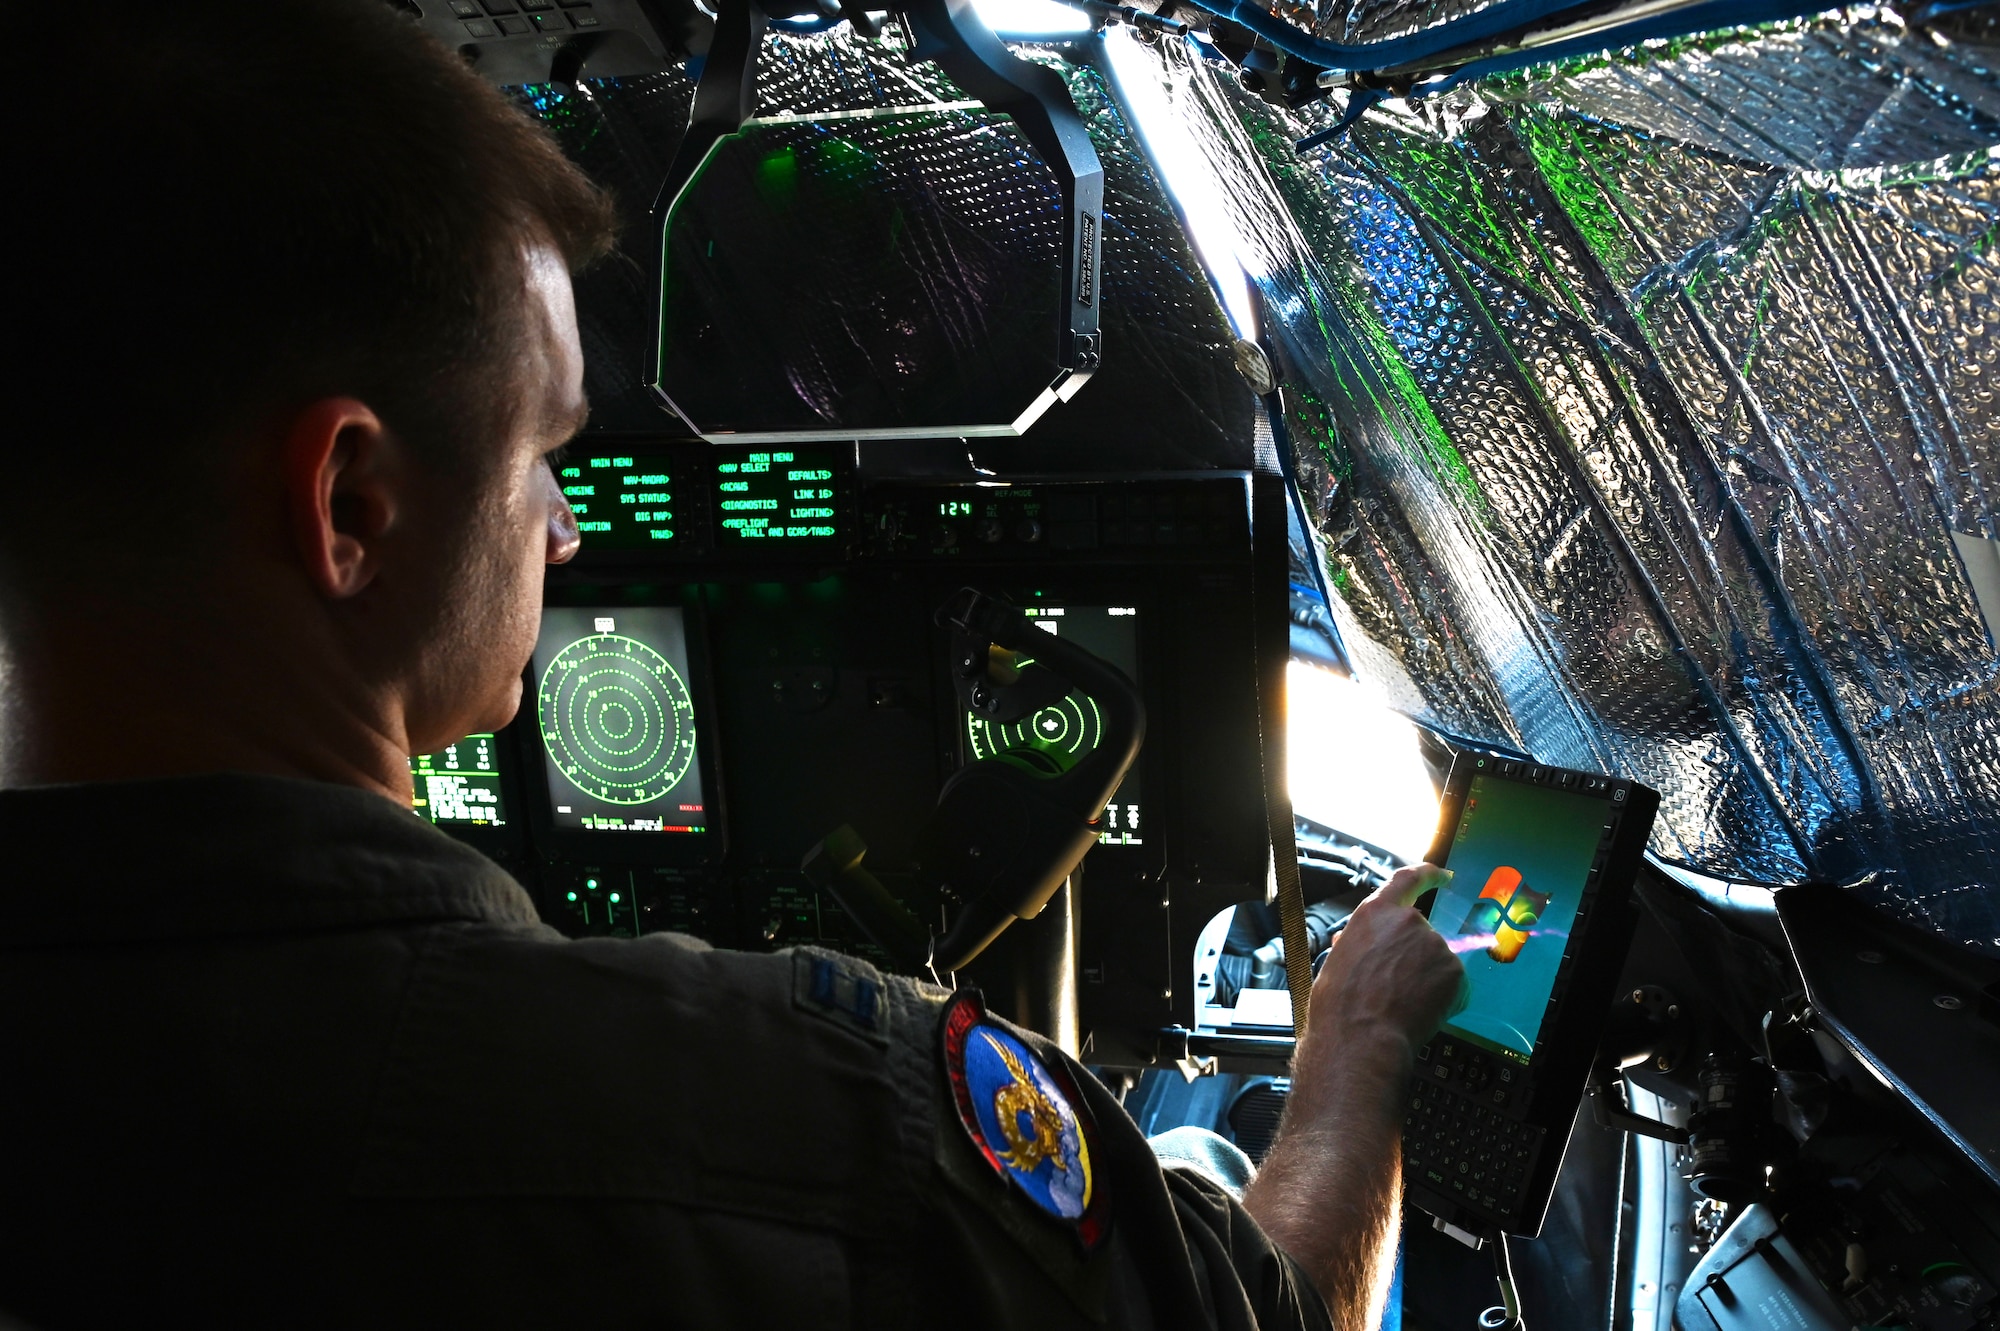 U.S. Air Force Capt. Gregg Burrow, 39th Airlift Squadron assistant director of operations, tests new data link technology on a C-130J Super Hercules at Dyess Air Force Base, Texas, June 26, 2023. The C-130s are undergoing Block 8.1 upgrades to help pilots, loadmasters and maintenance personnel by providing enhanced mission capabilities using modern technologies. (U.S. Air Force photo by Airman 1st Class Emma Anderson)